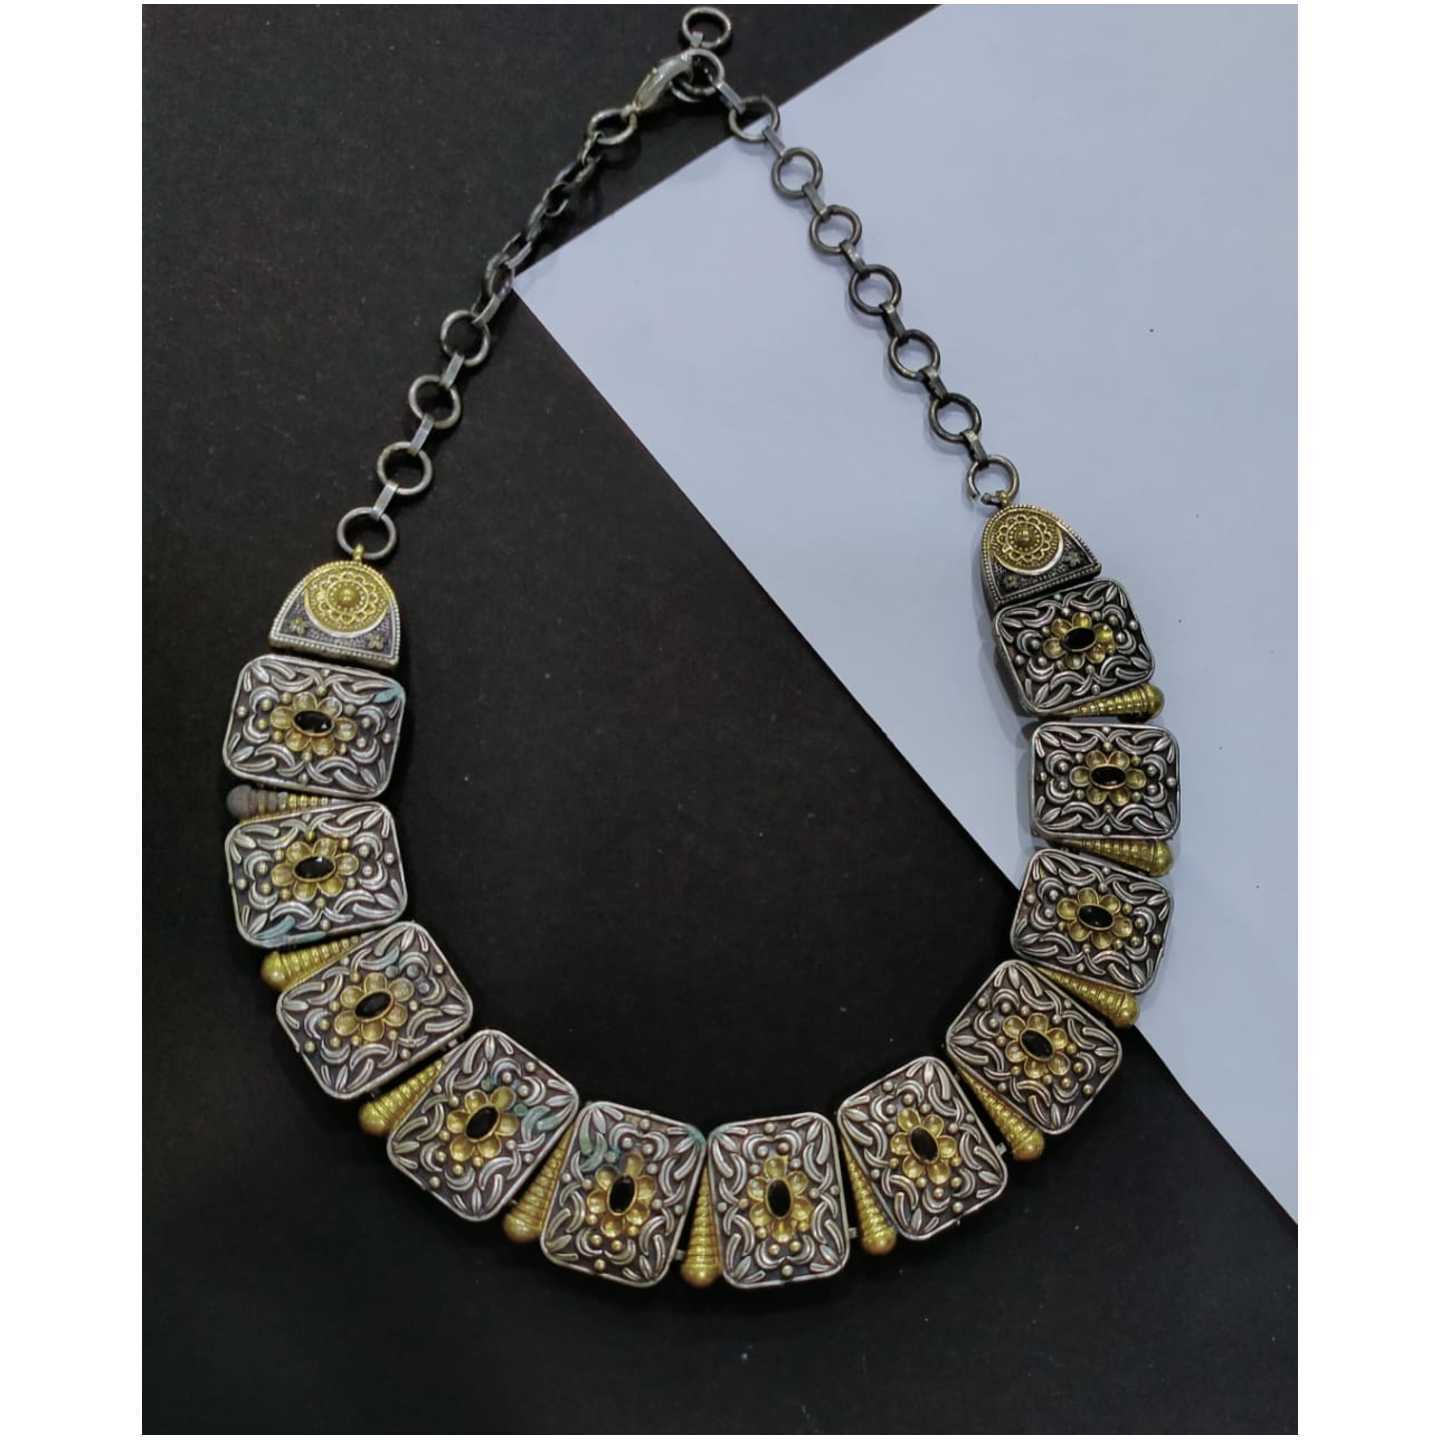 Two Tone  High Quality  Necklace